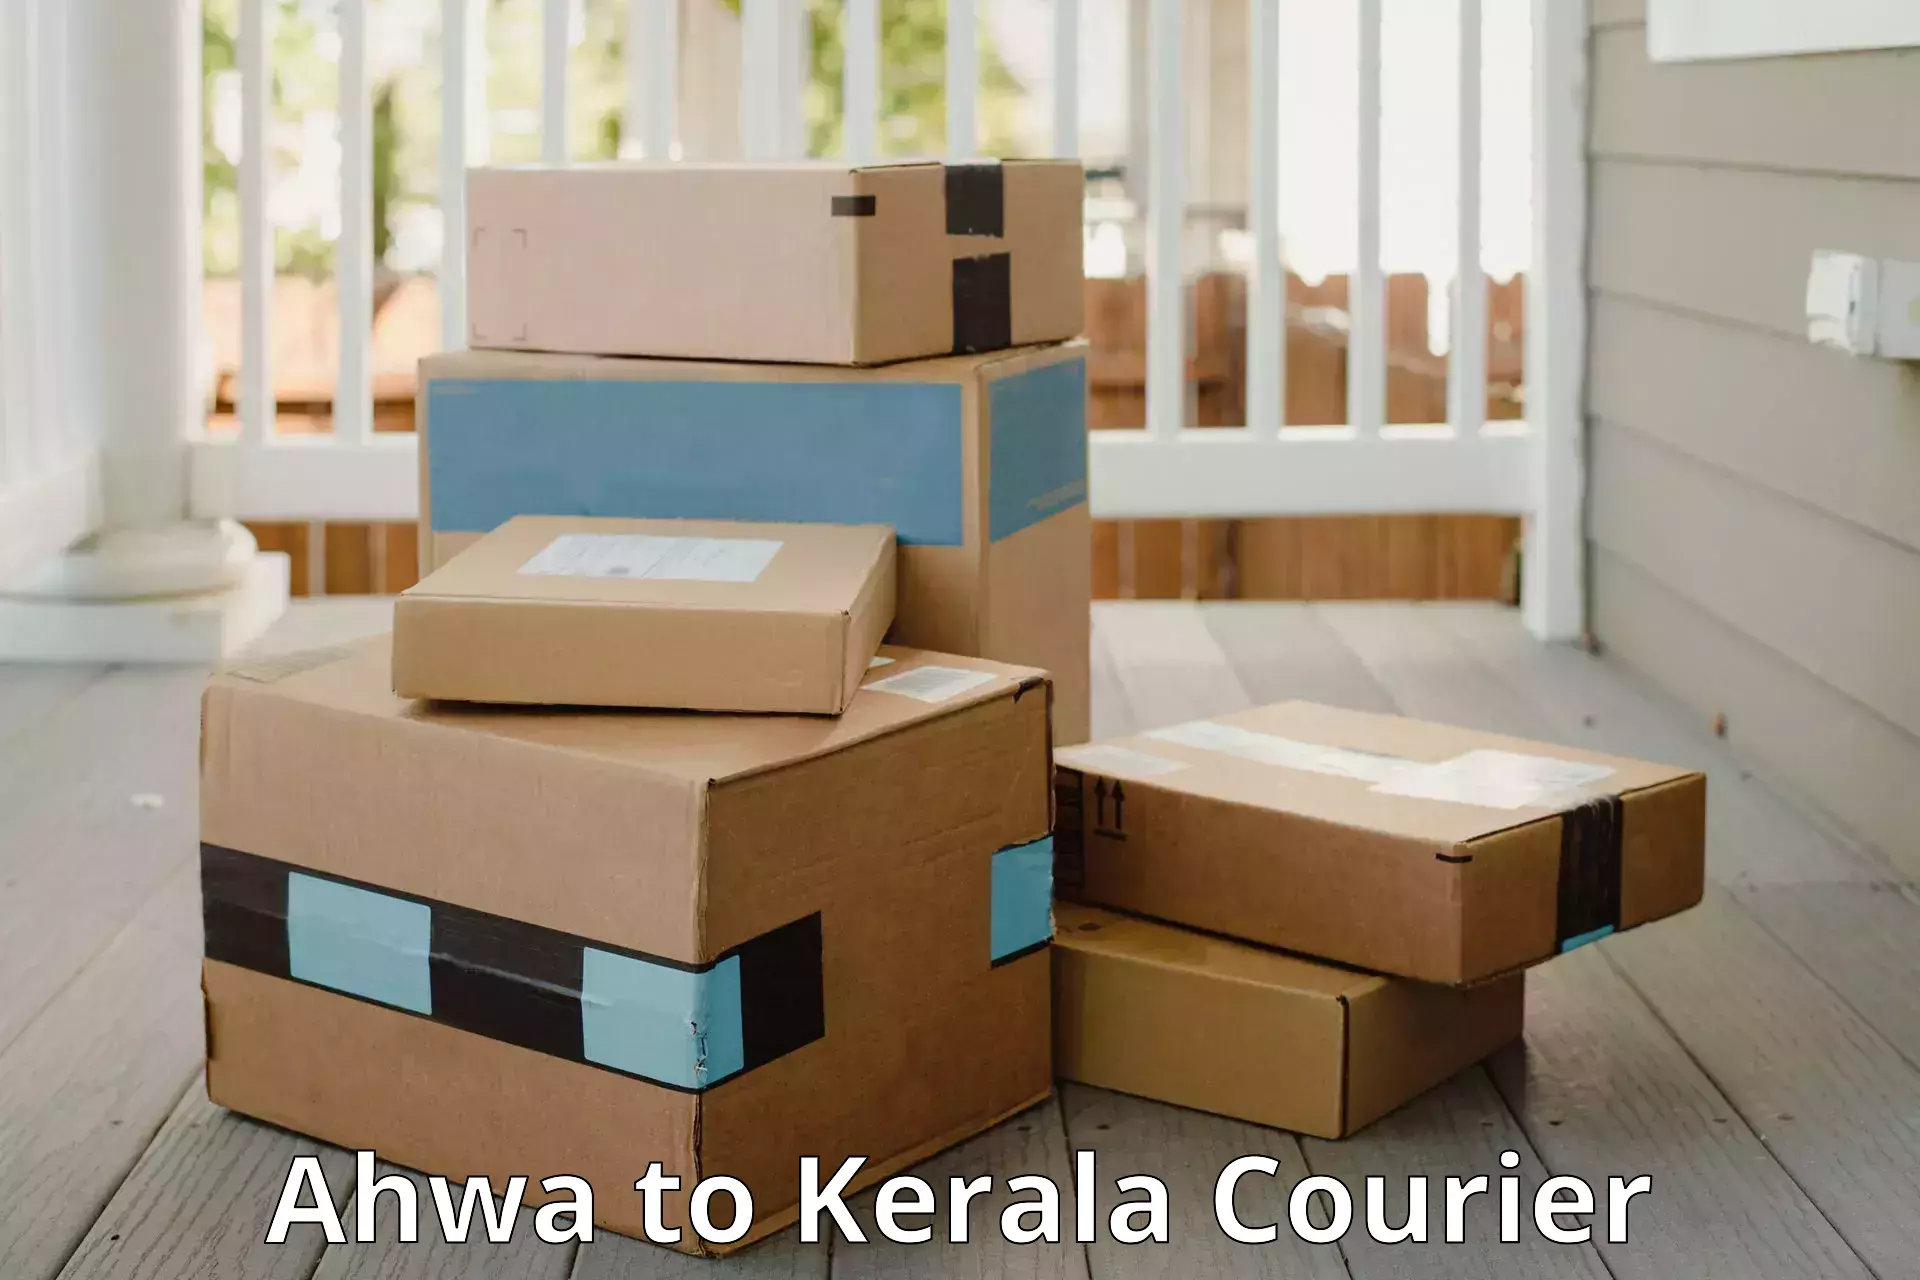 Online luggage shipping booking Ahwa to Kerala